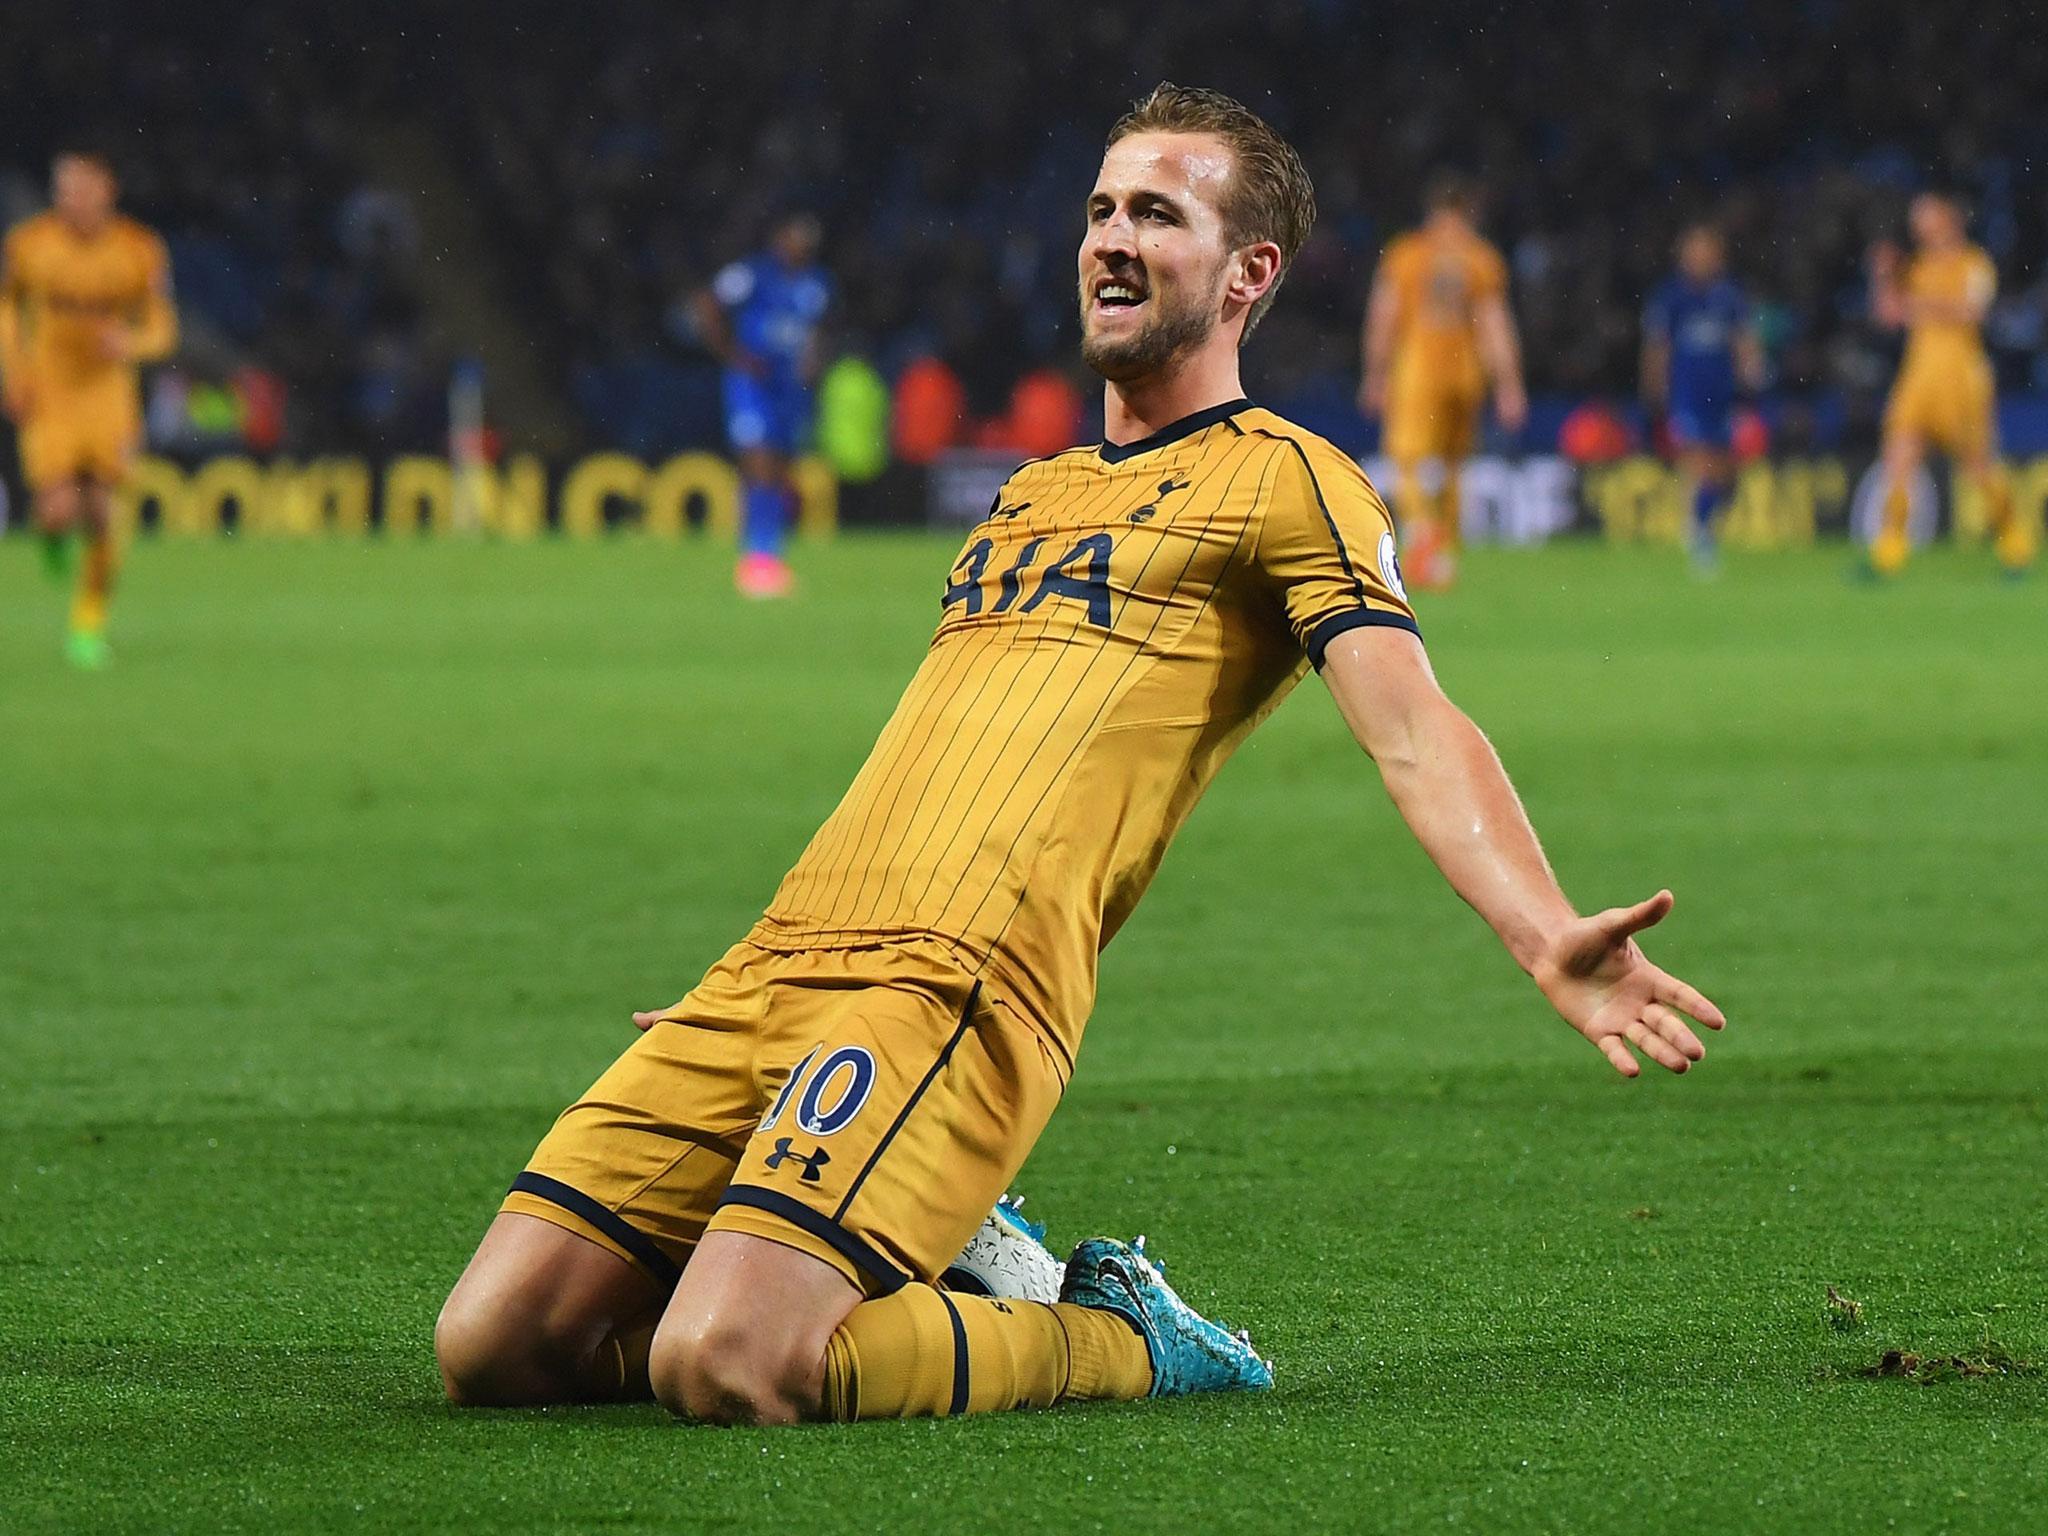 Harry Kane was at his very best as Tottenham hit Leicester for six